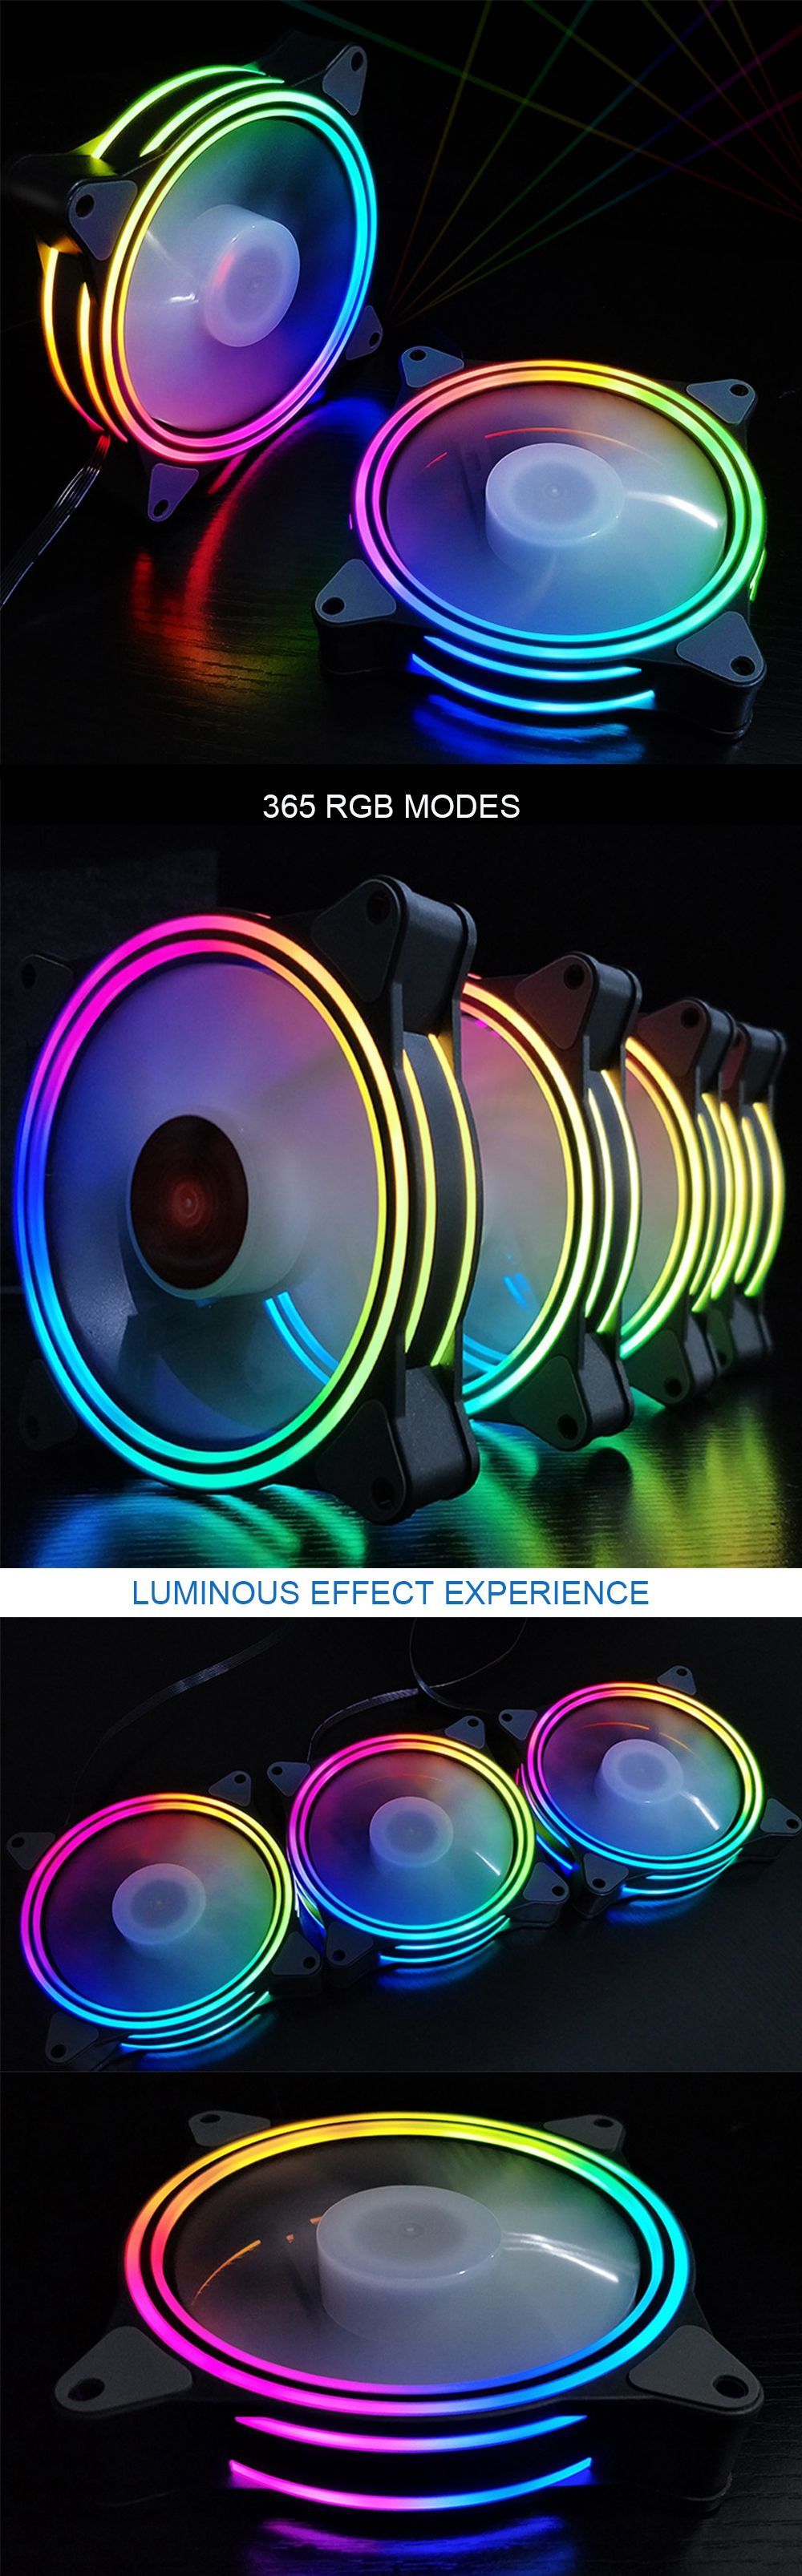 Coolmoon-5PCS-120mm-RGB-Adjustable-LED-Cooling-Fan-Multiple-Thin-Apertures-CPU-Cooling-Fan-with-the--1579359